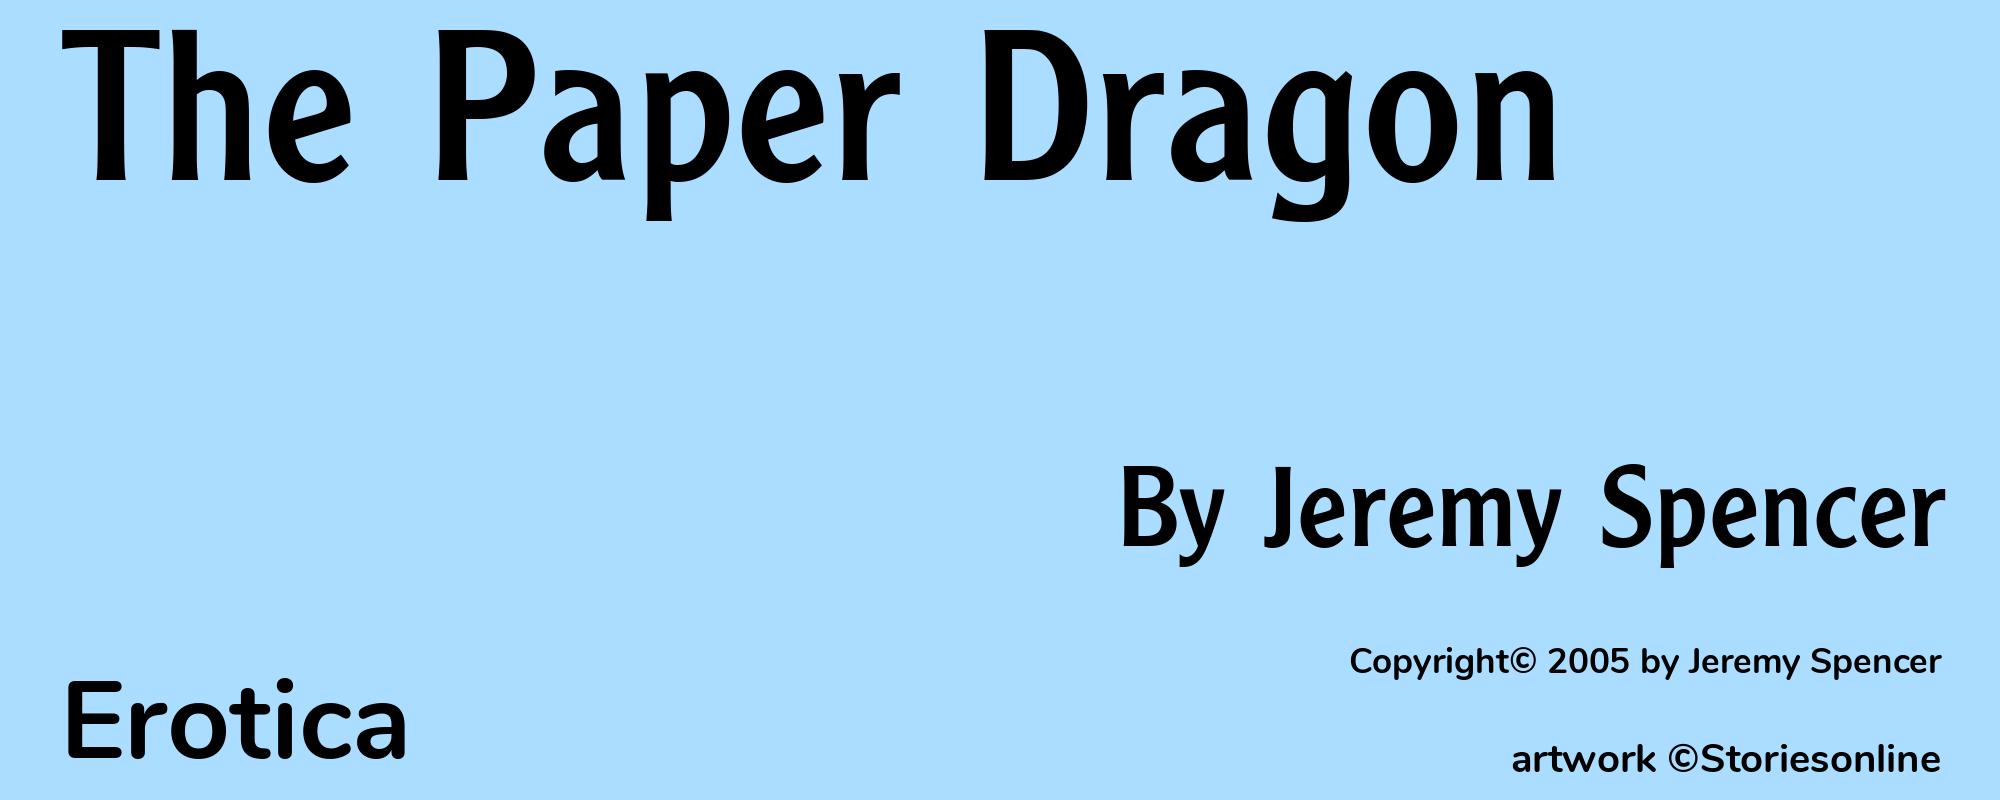 The Paper Dragon - Cover